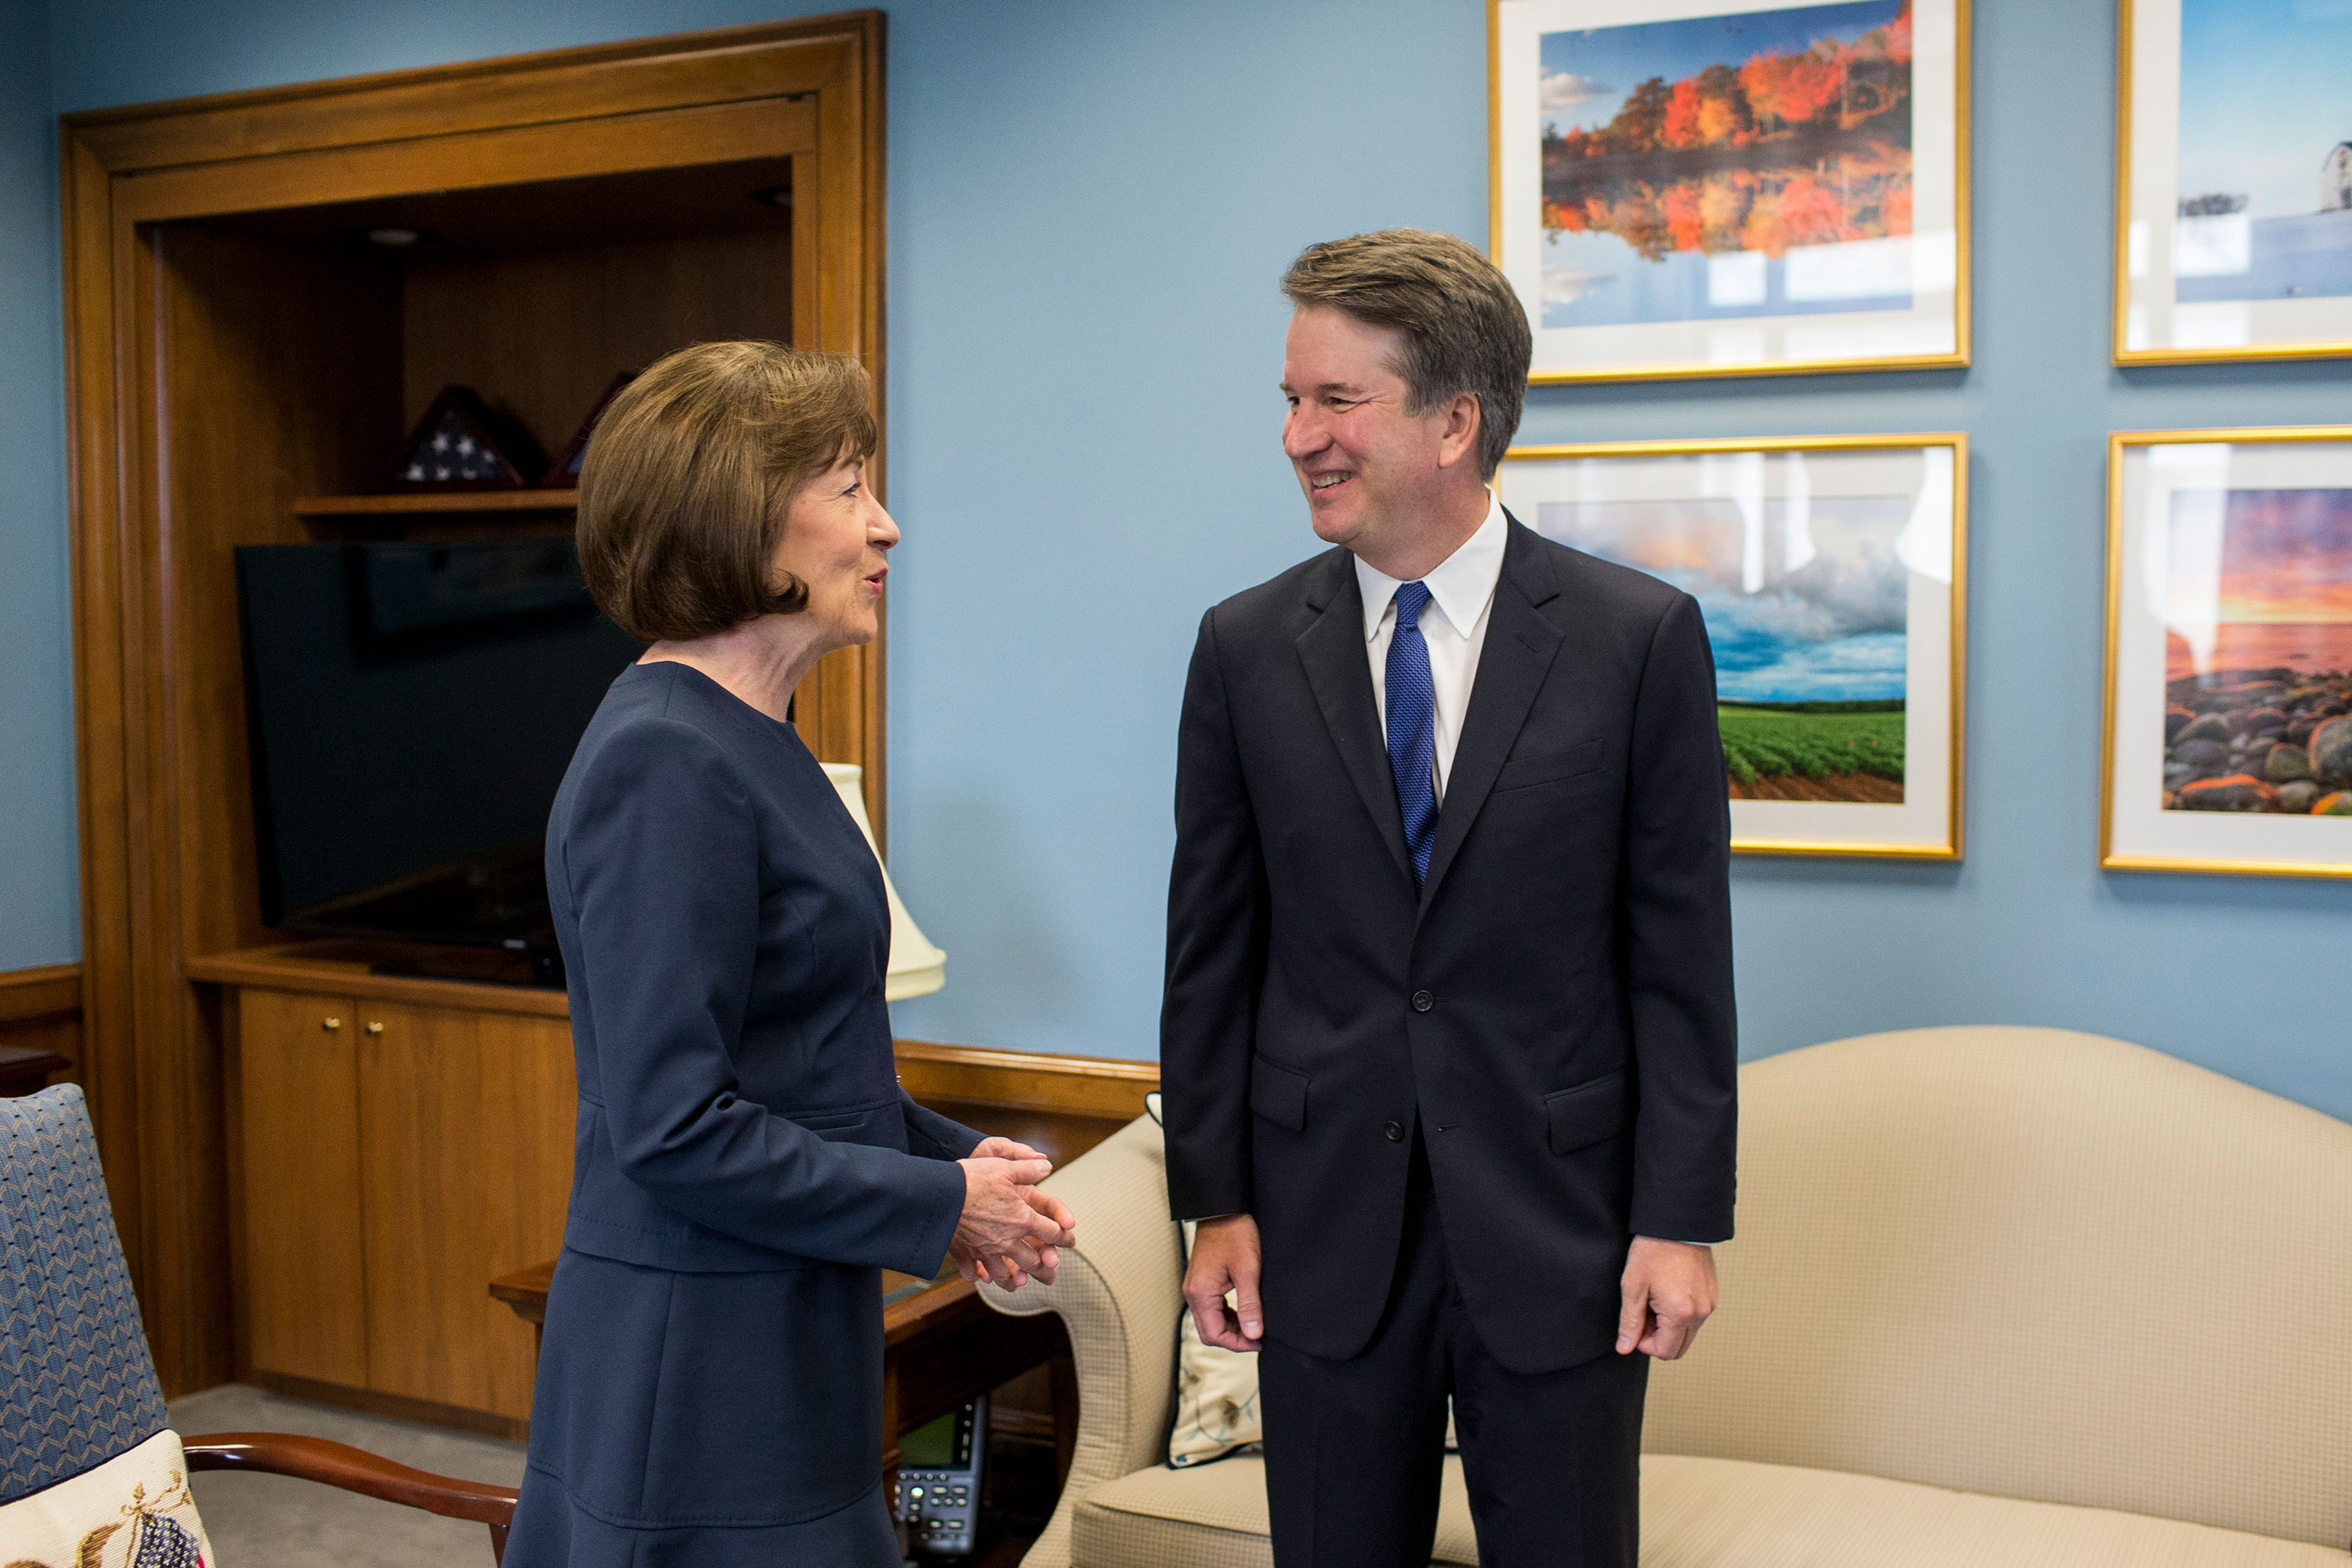 Then-Supreme Court nominee Brett Kavanaugh meets with Sen. Susan Collins in her office on Capitol Hill in August 2018.